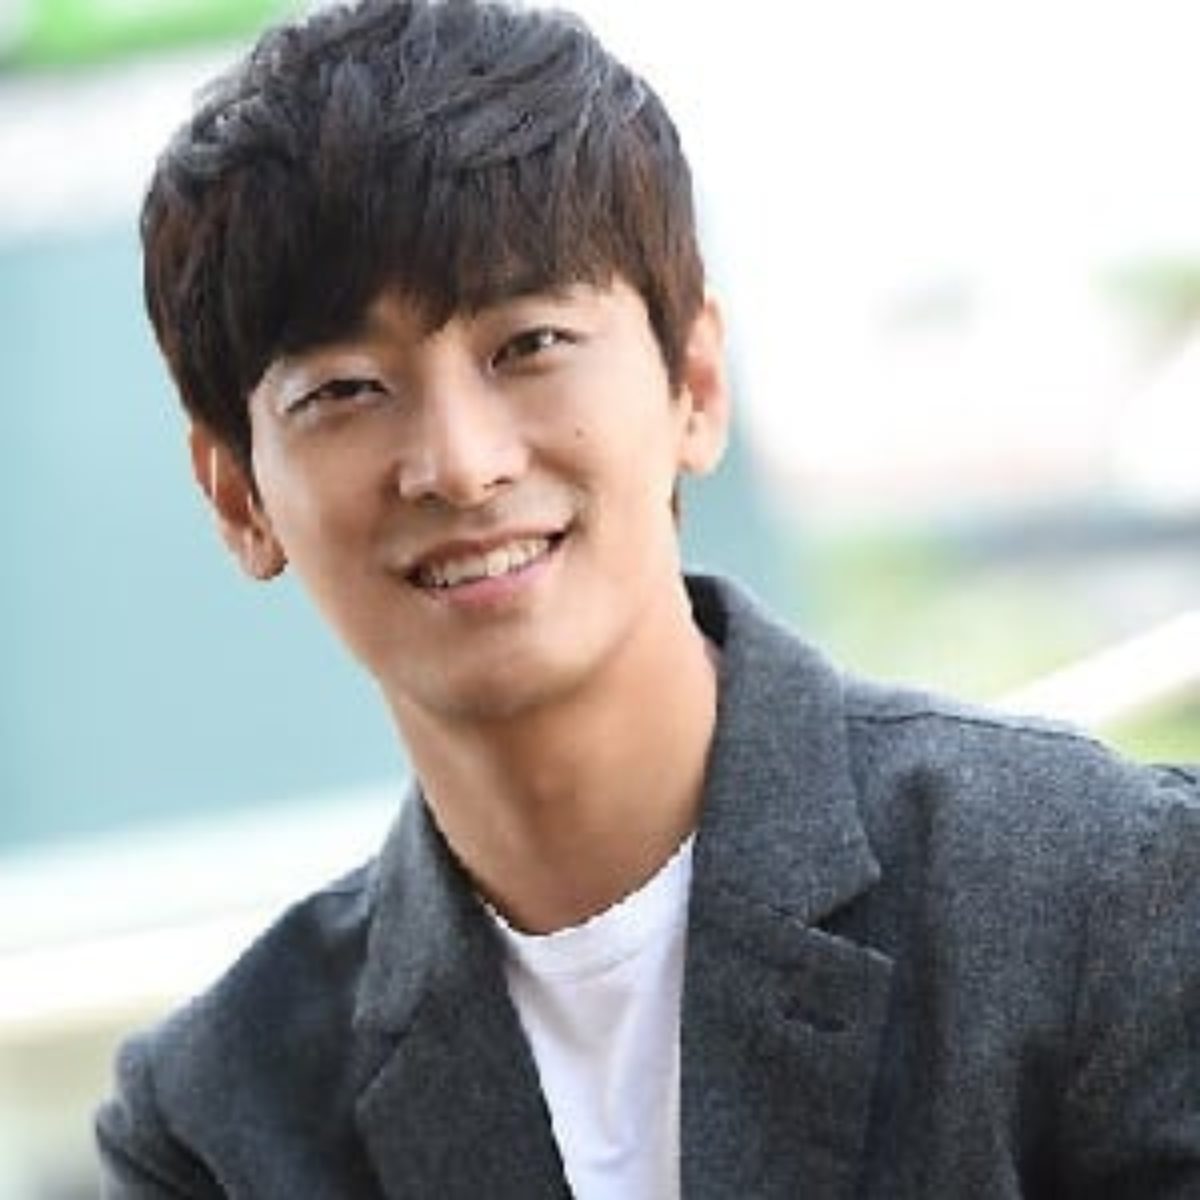 Let's have a look at his family, personal life, career ji soo is a sou...